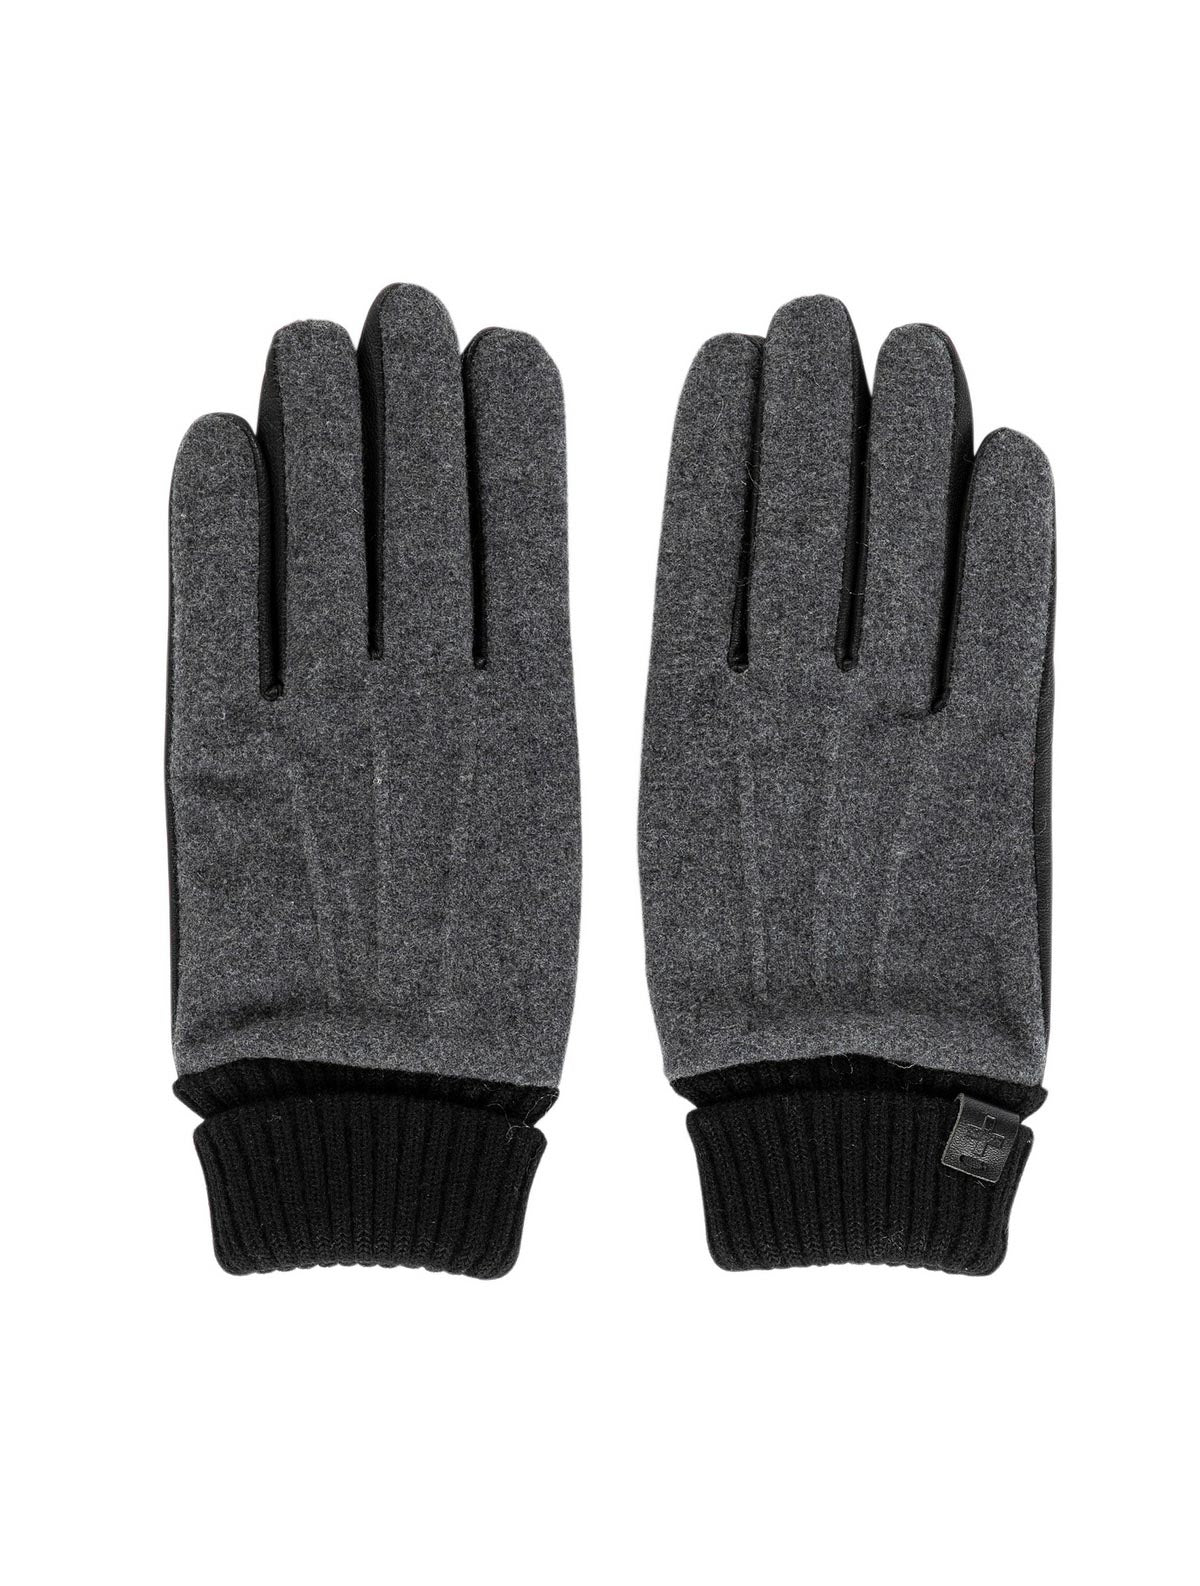 Wool Leather Gloves